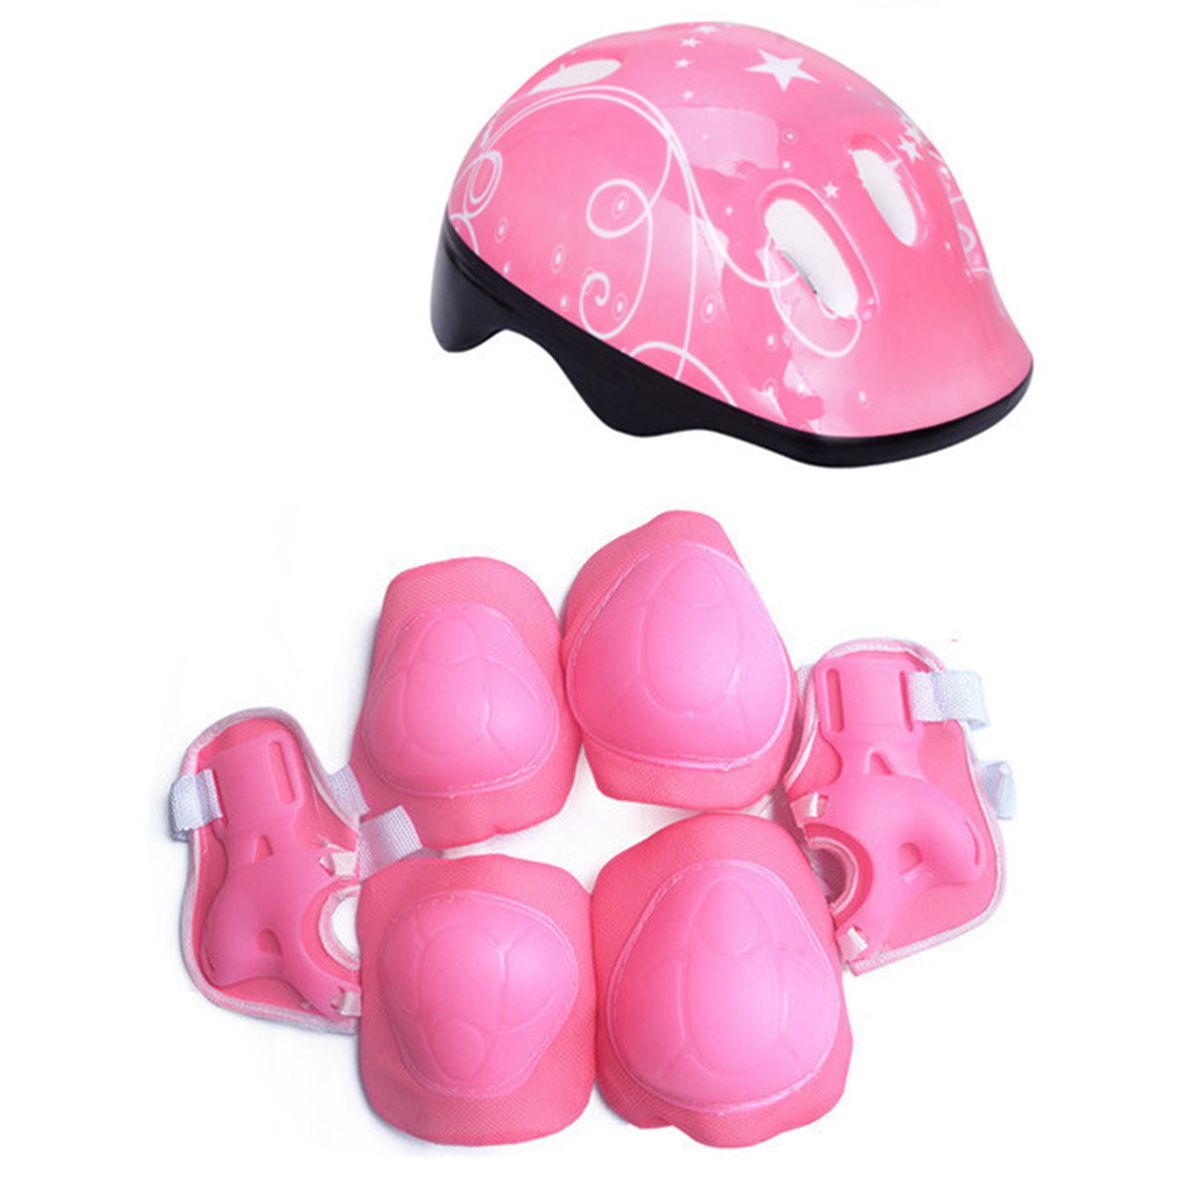 7-IN-1-Kidss-Balance-Bike-Helmet-Kits-With-Protect-Knee-Wrist-Elbow-Pads-Roller-Skating-Protective-E-1734300-4